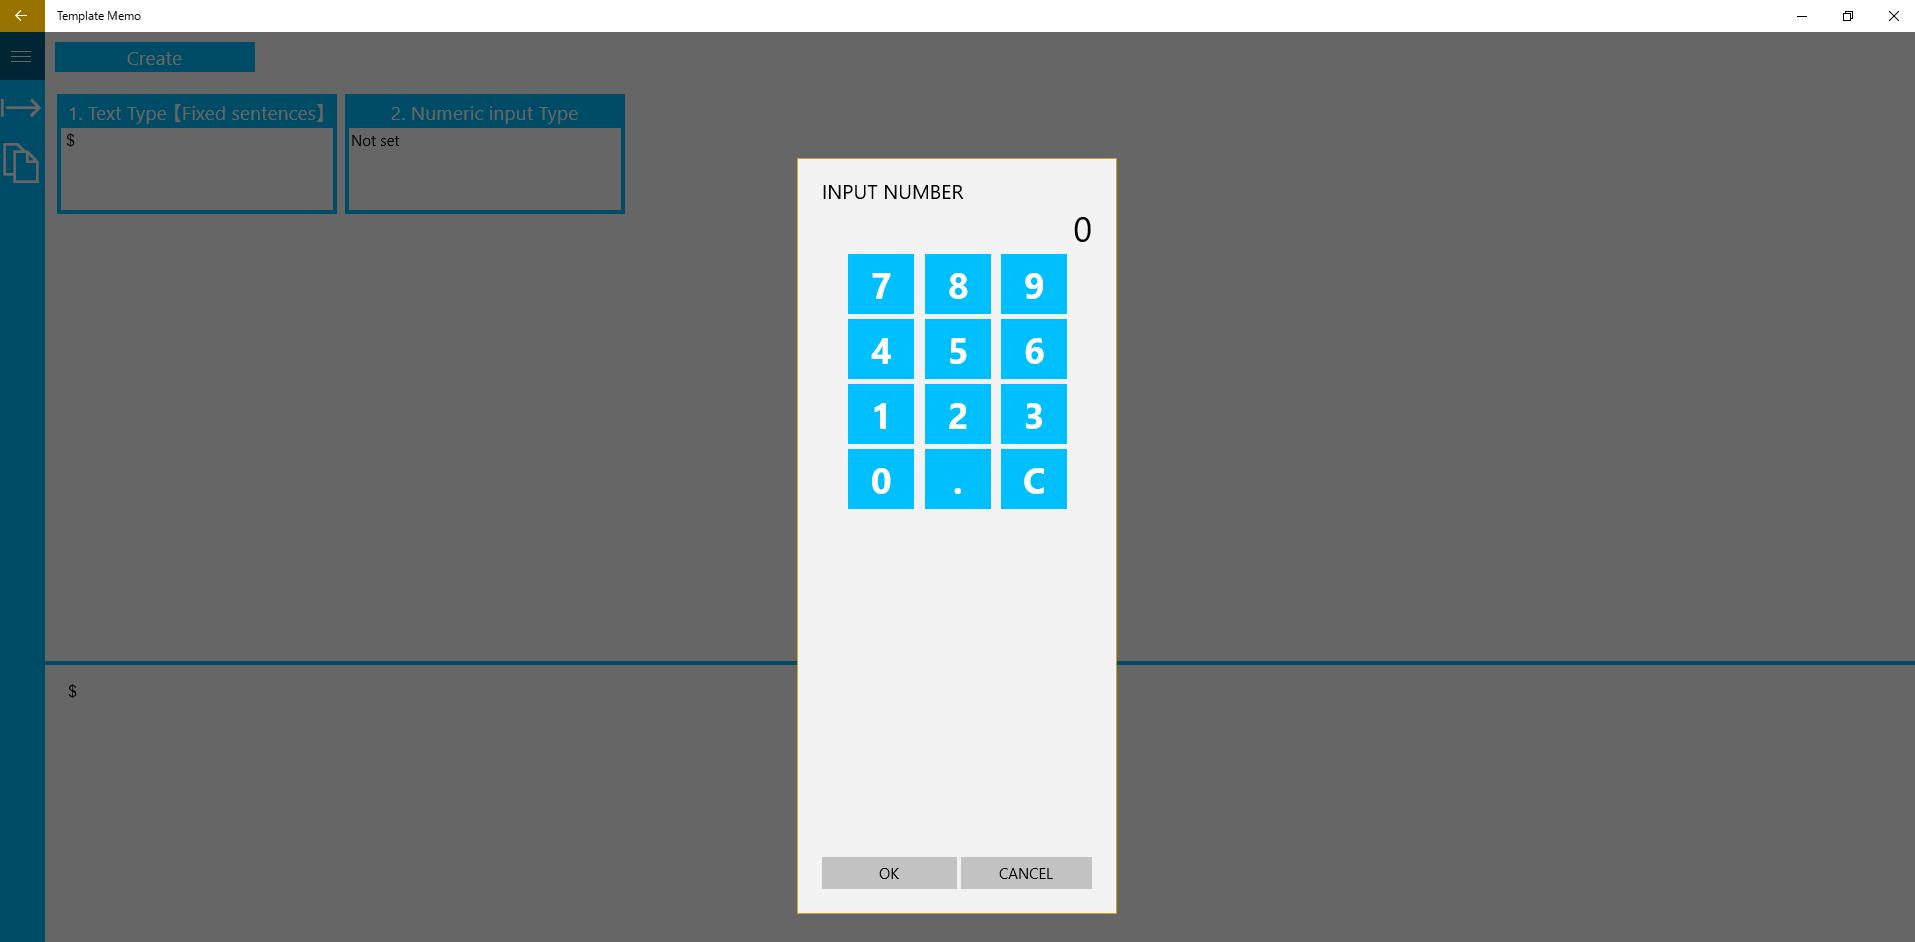 Numeric input Type
・ Calculator type input can be made when creating templates.